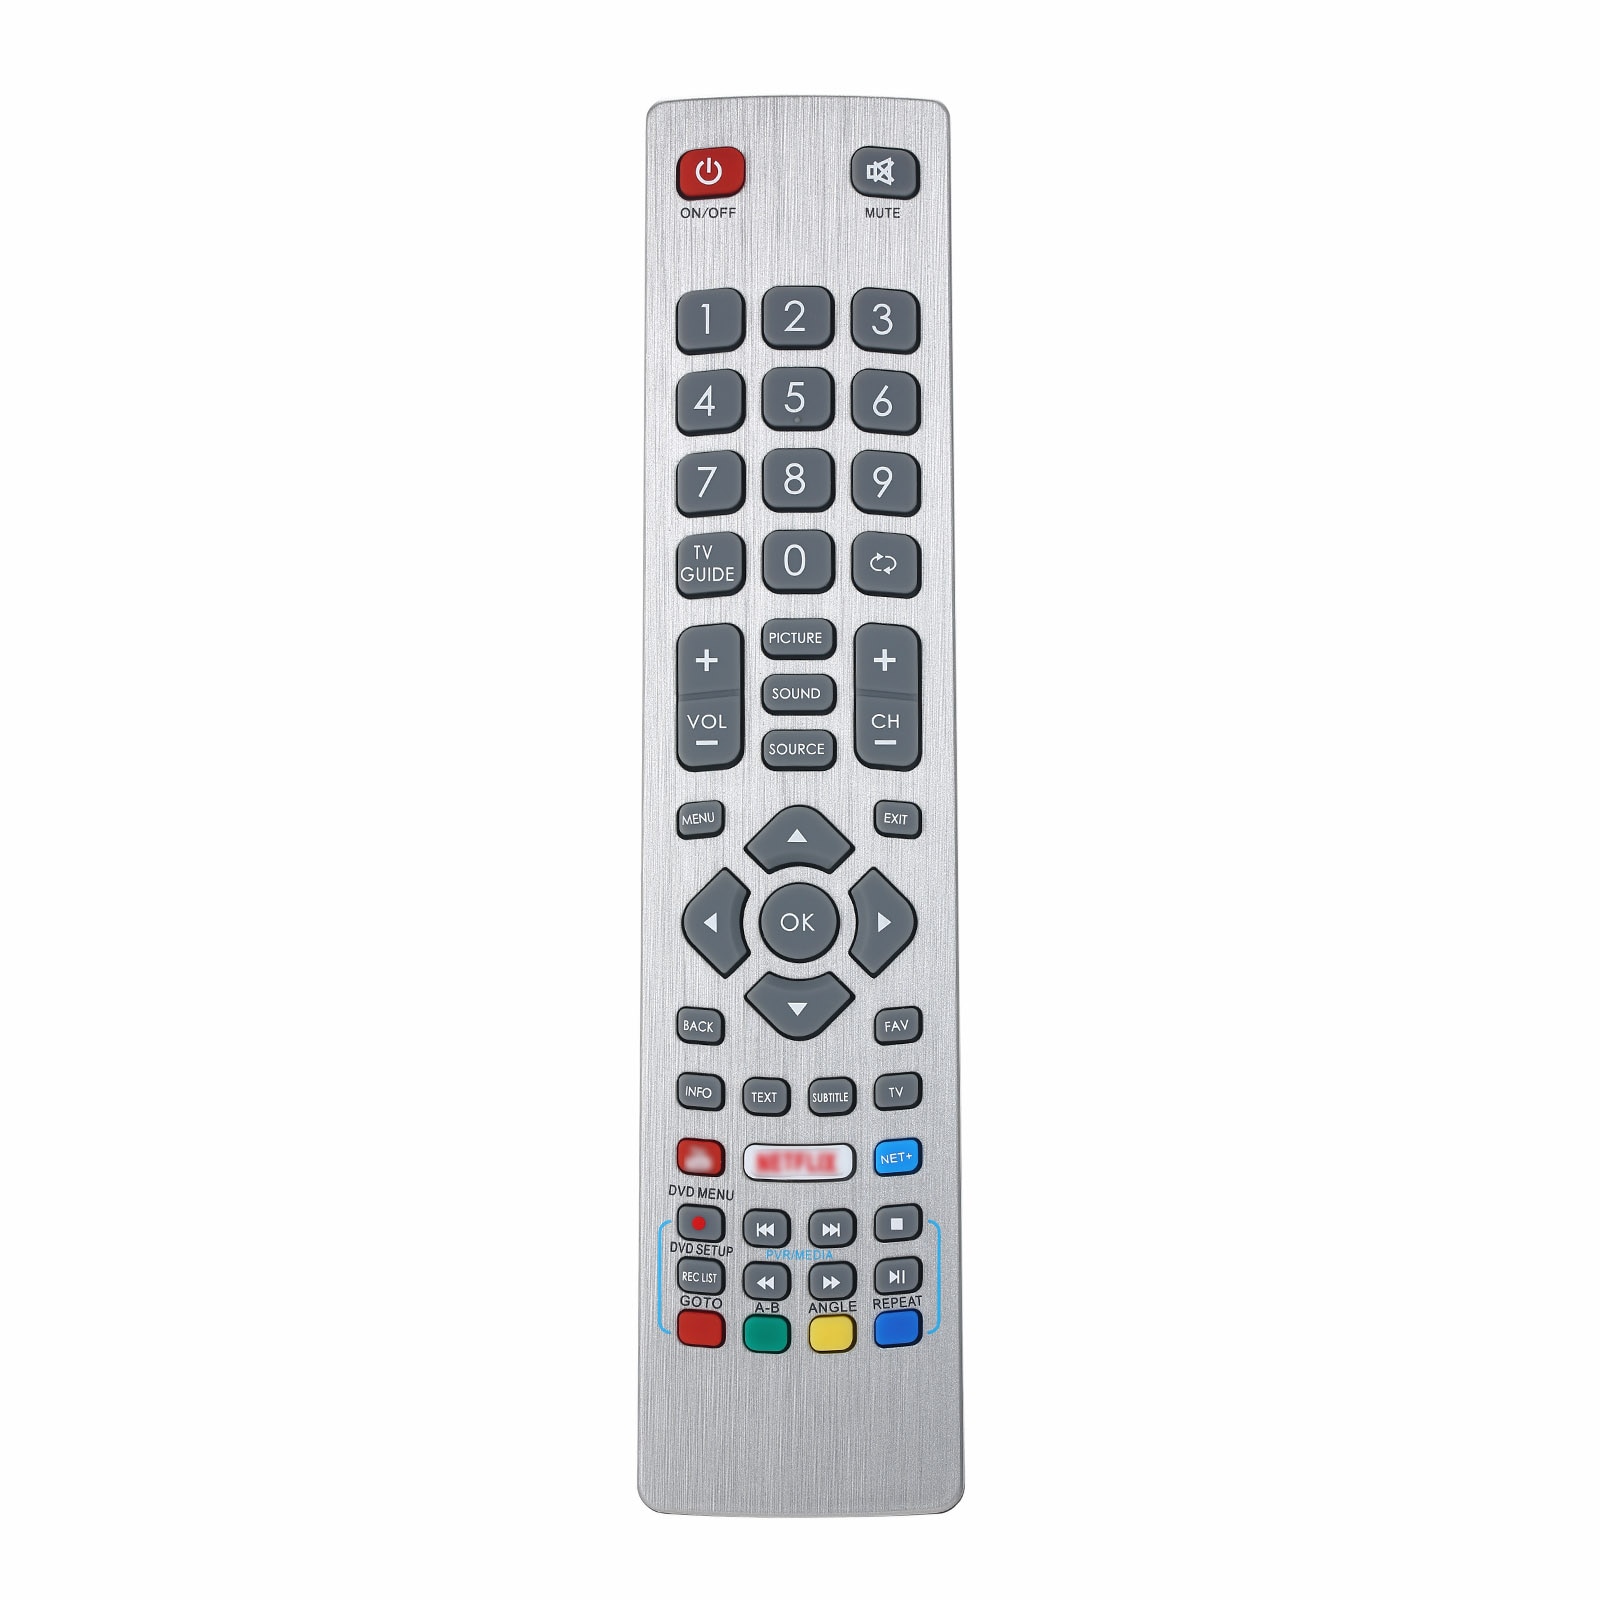 Newest Replacement TV Remote Control for Sharp Aquos LC-49CFG6001K LC-40FG5242E LC-40UG7252E Remote Controller Smart Replacement